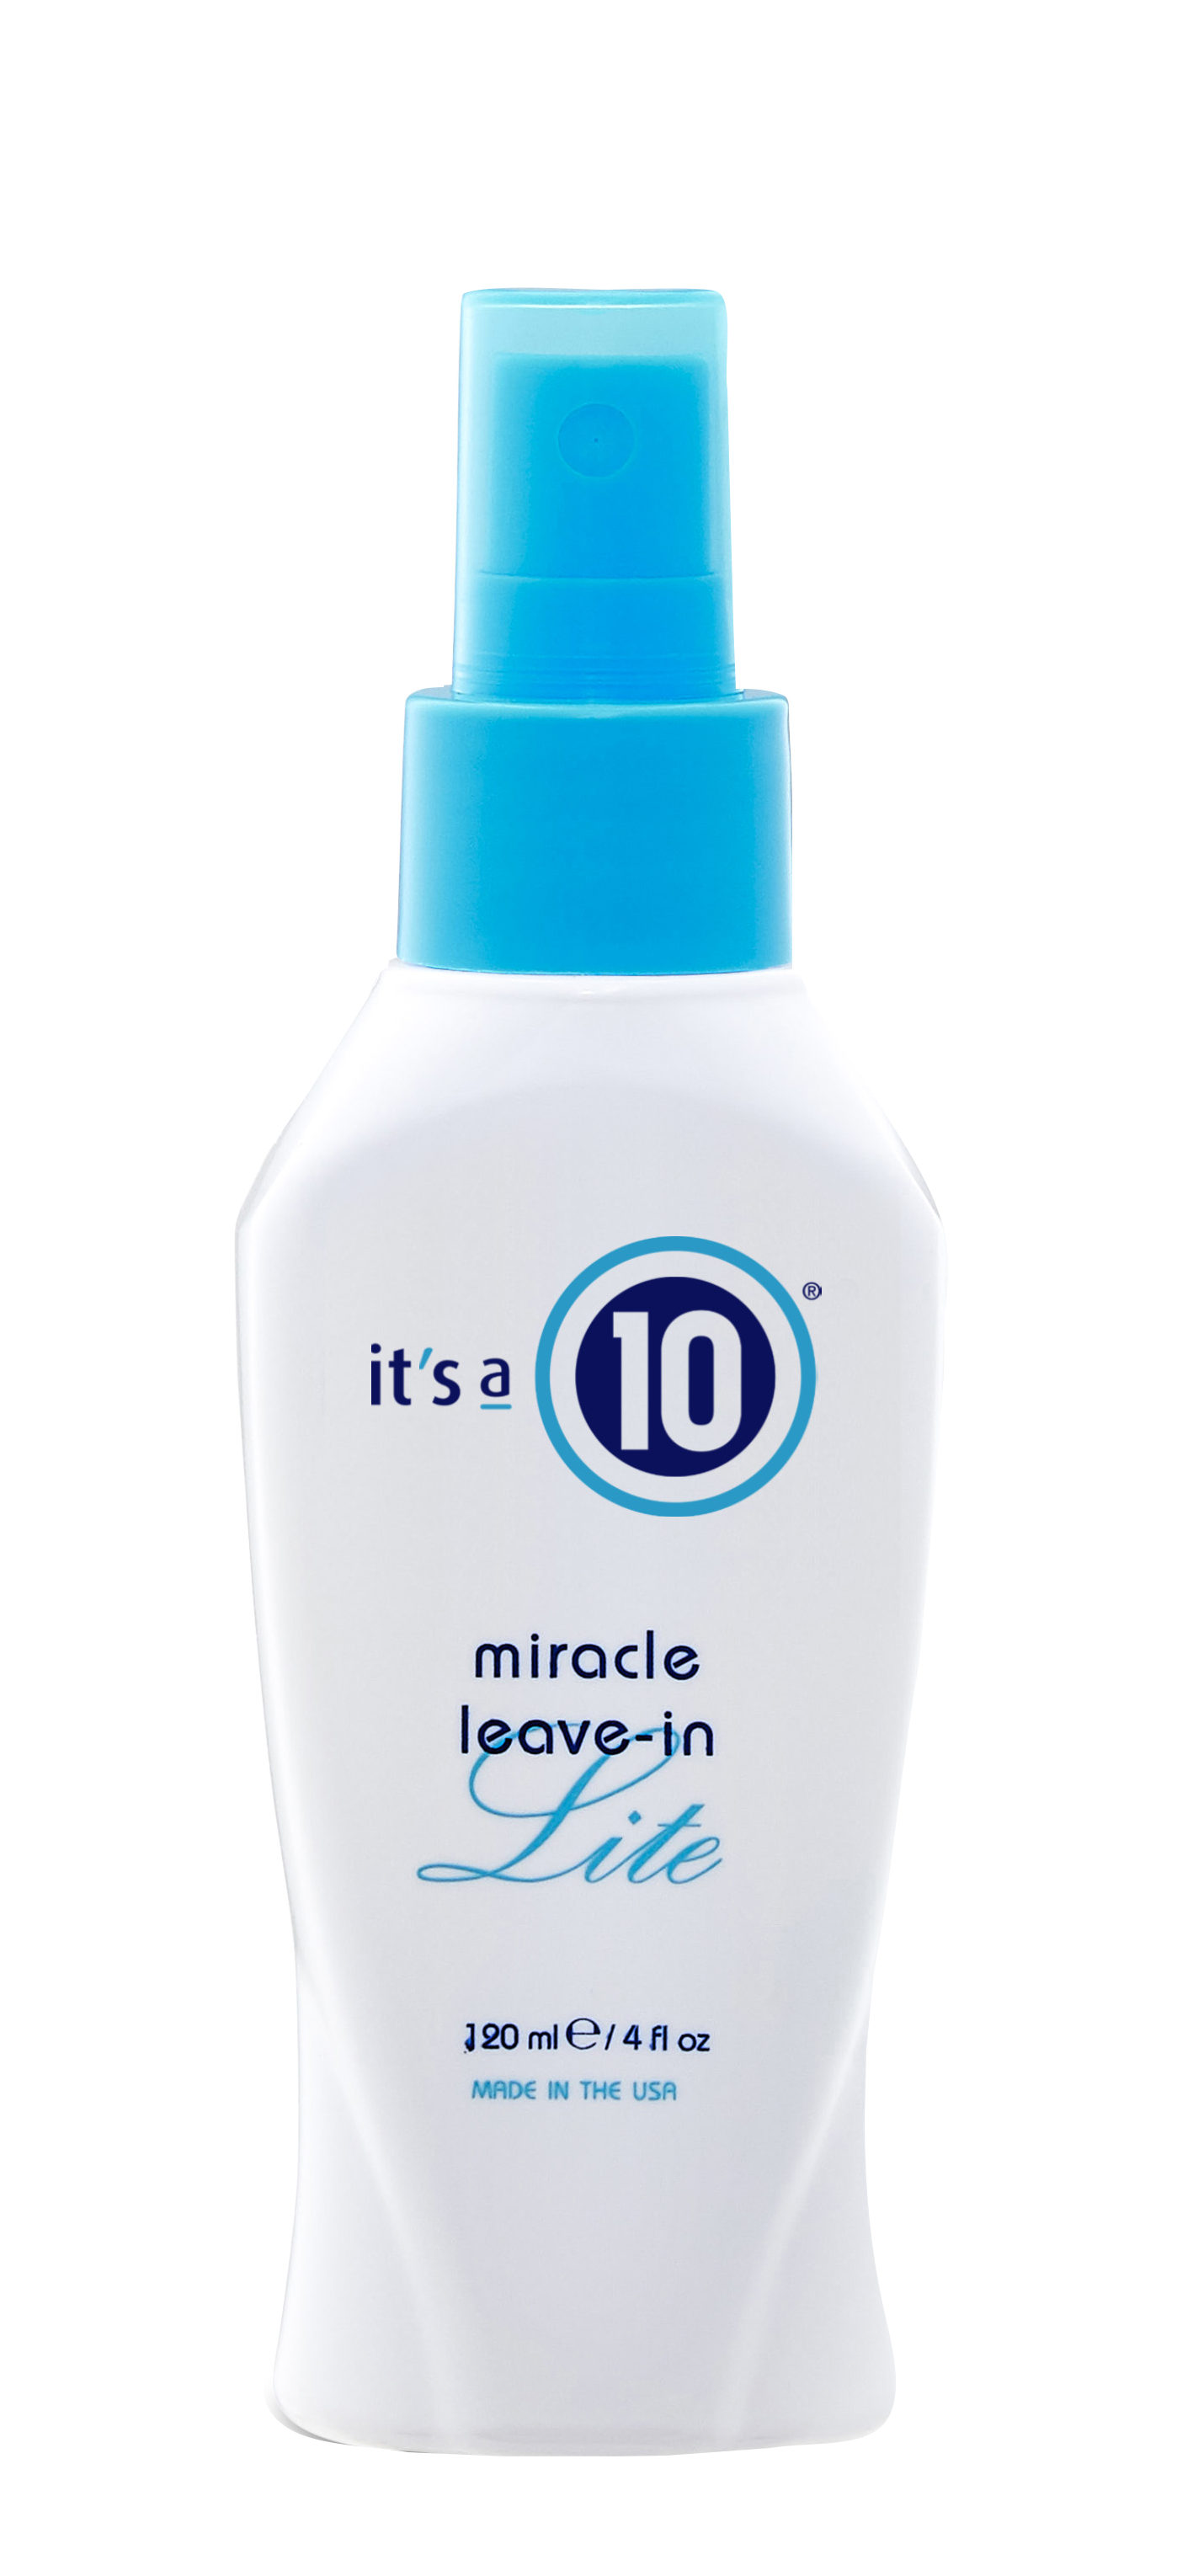 It's a 10 Miracle Leave-In Conditioner Lite